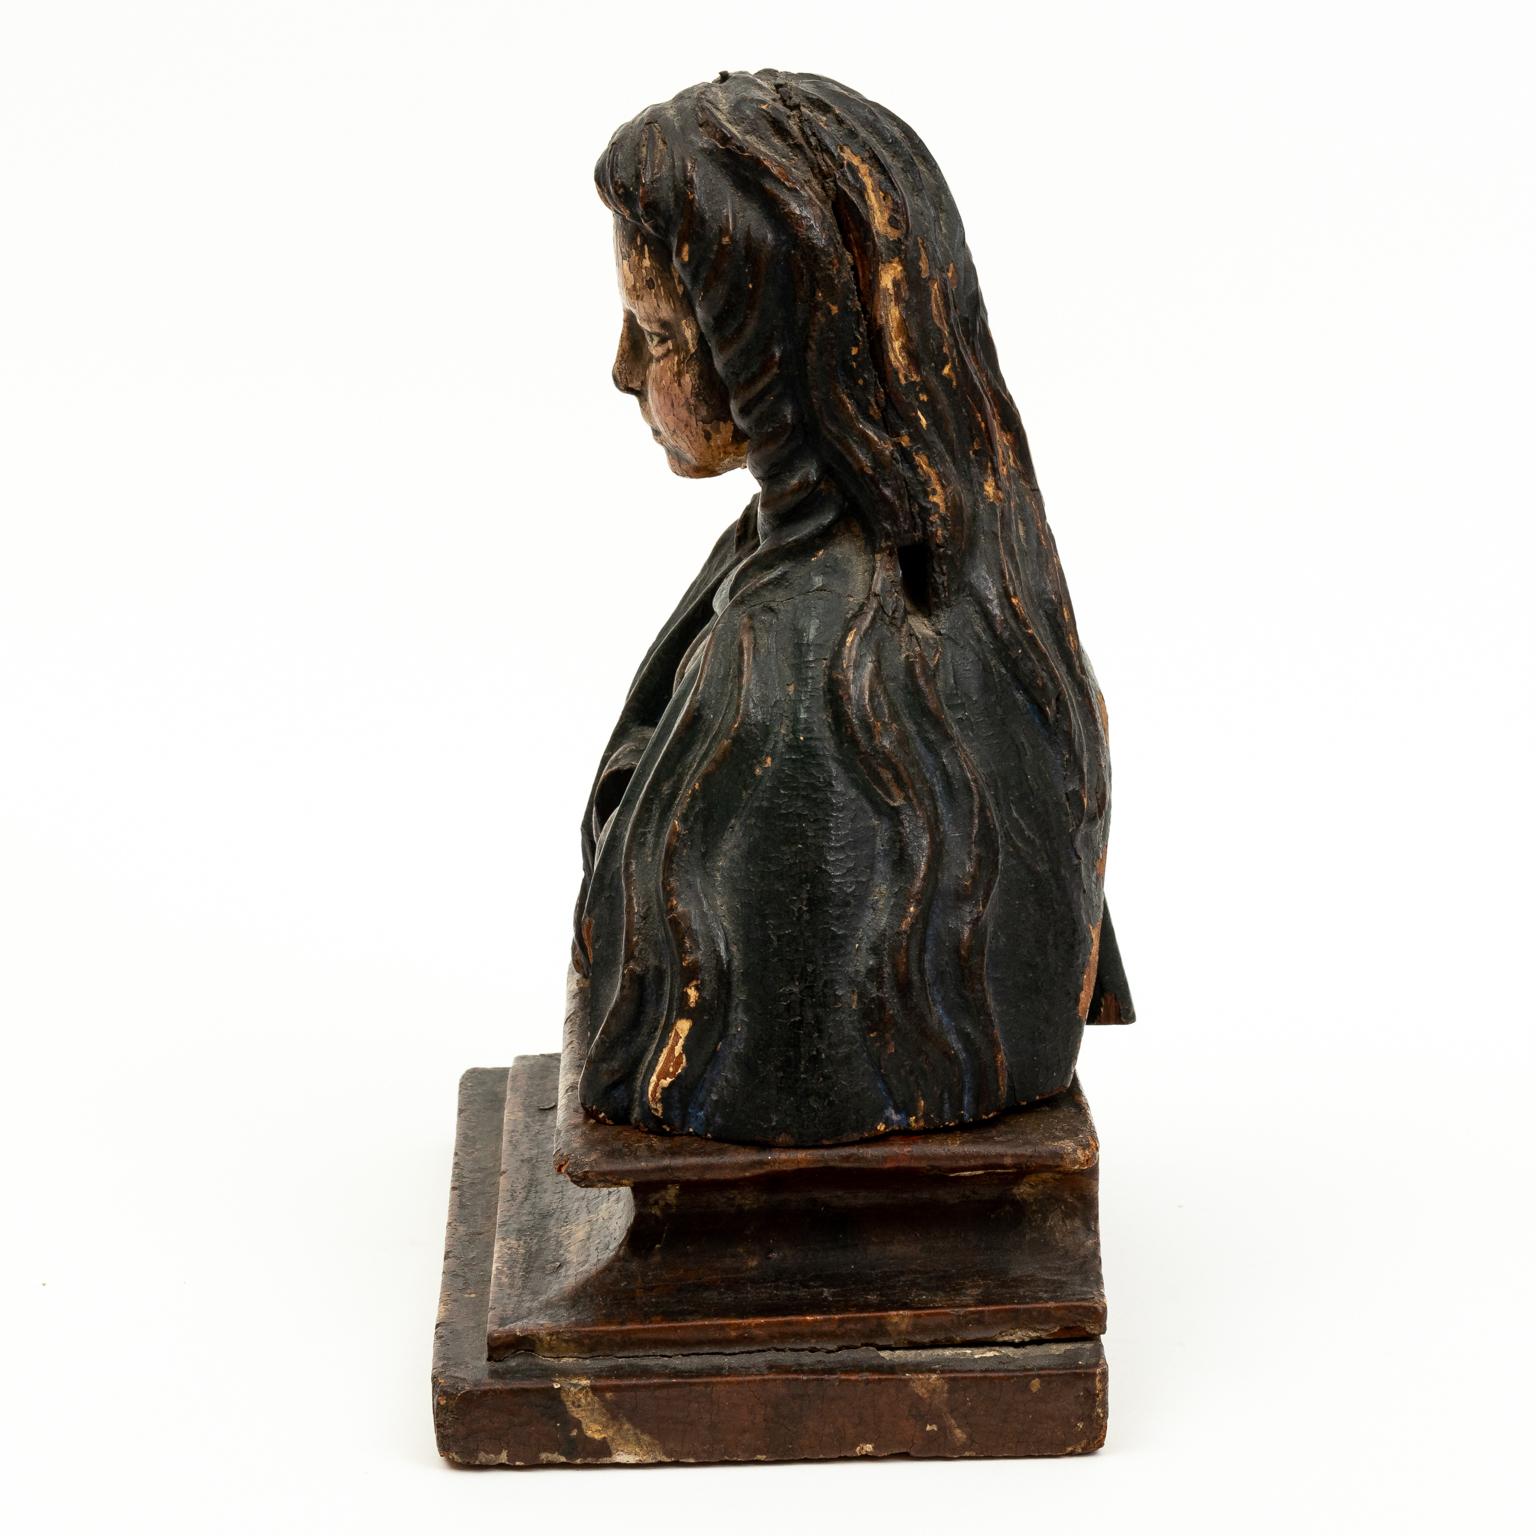 Circa 17th century carved fruitwood and polychrome female reliquary on period faux marble box with hole in heart for holding relics. Made in Northern Europe.